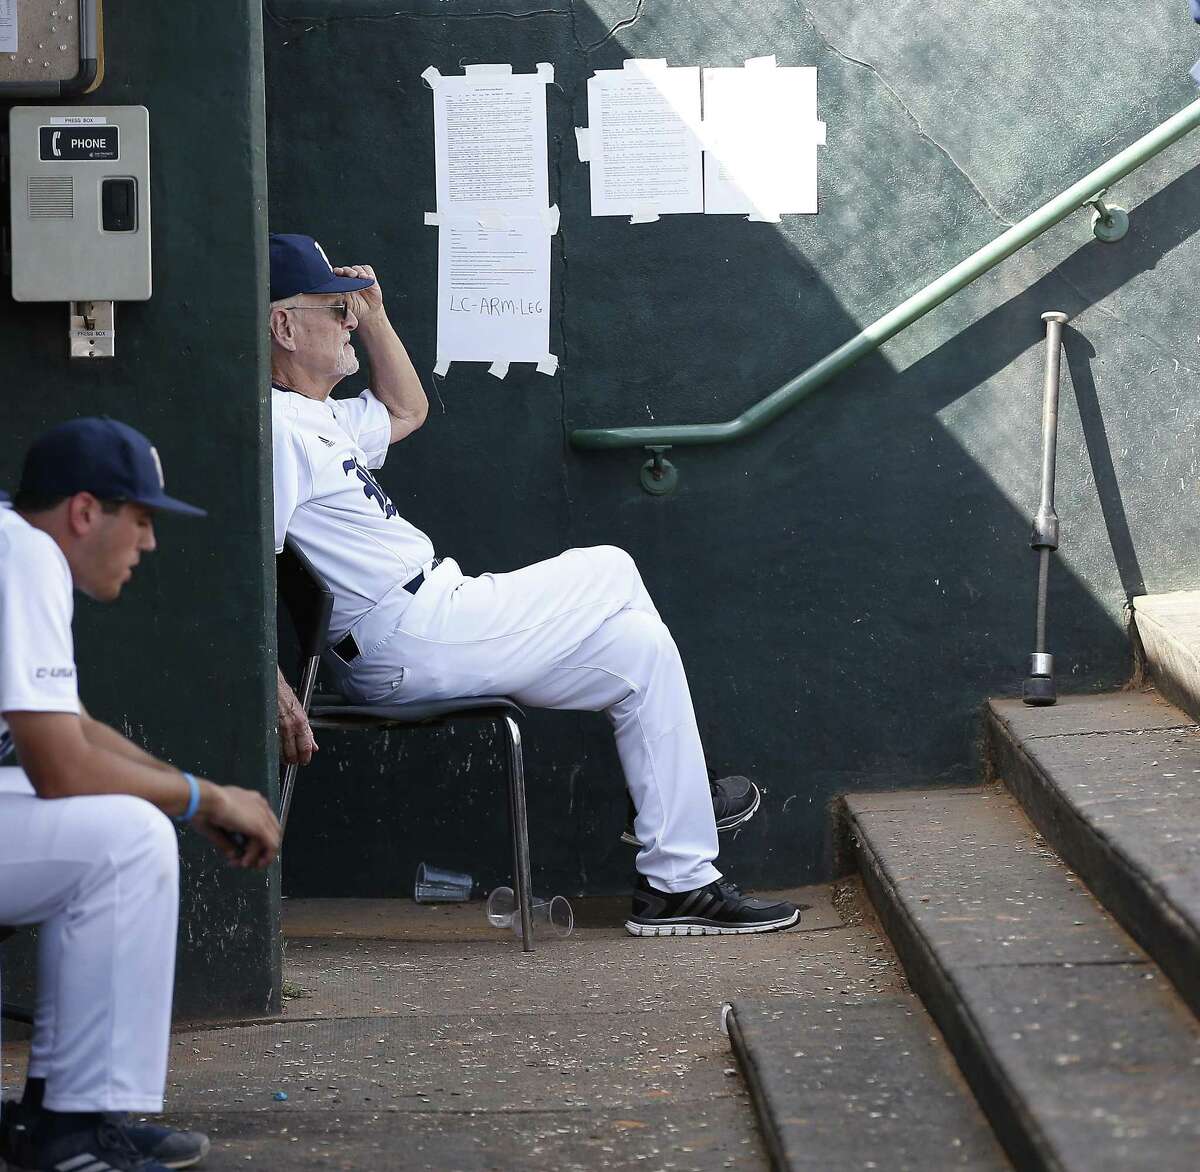 Rice coach Wayne Graham watches the action from his chair during his last home game at Reckling Park Sunday, May 13, 2018, in Houston. ( Steve Gonzales / Houston Chronicle )